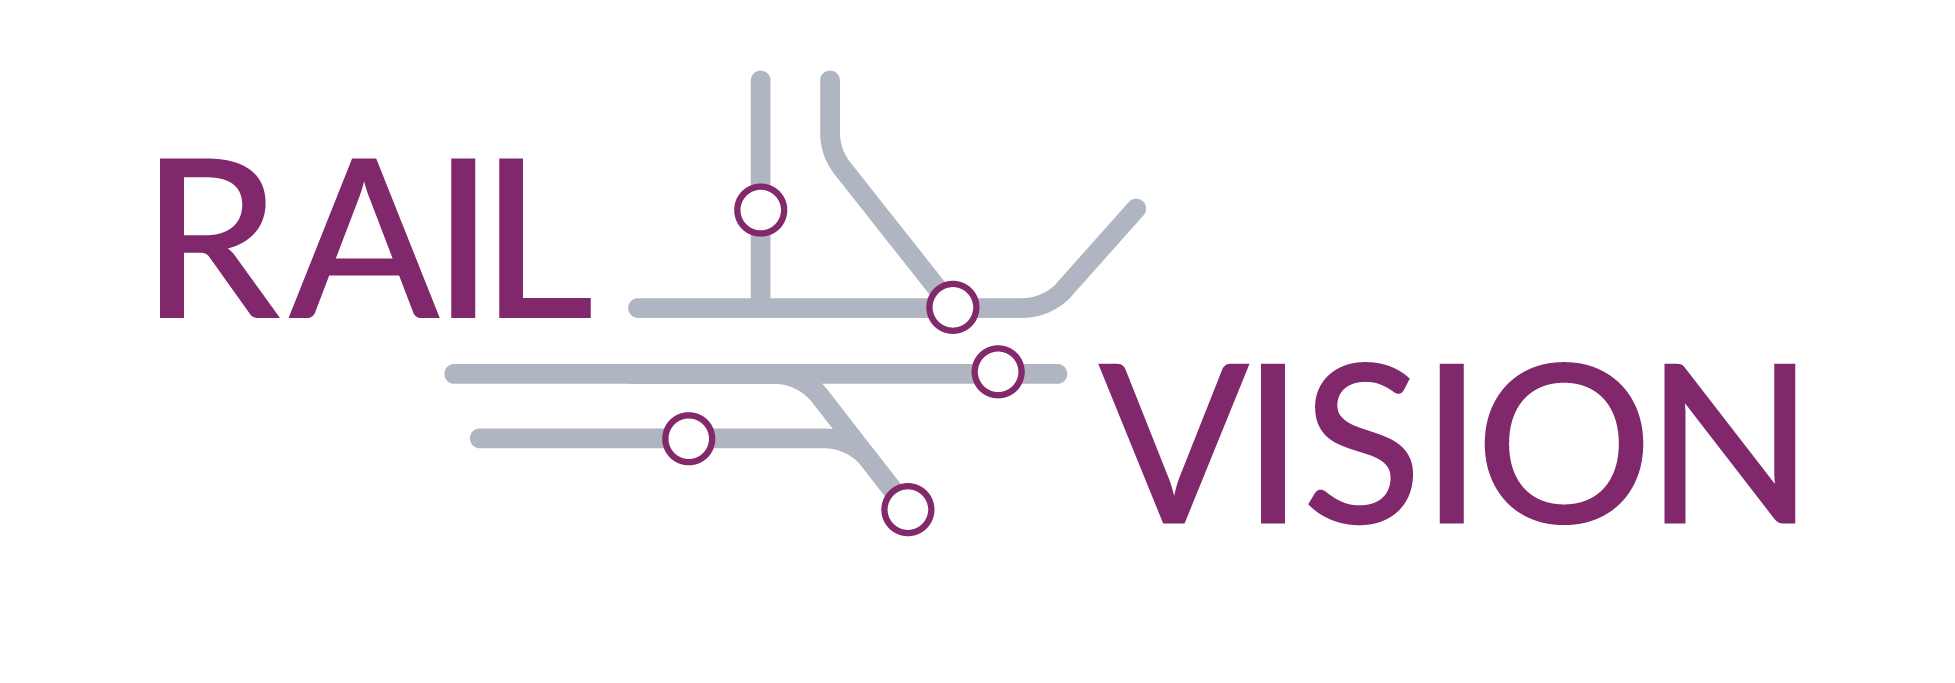 Logo with "Rail Vision" in purple and a grid layout between the two words